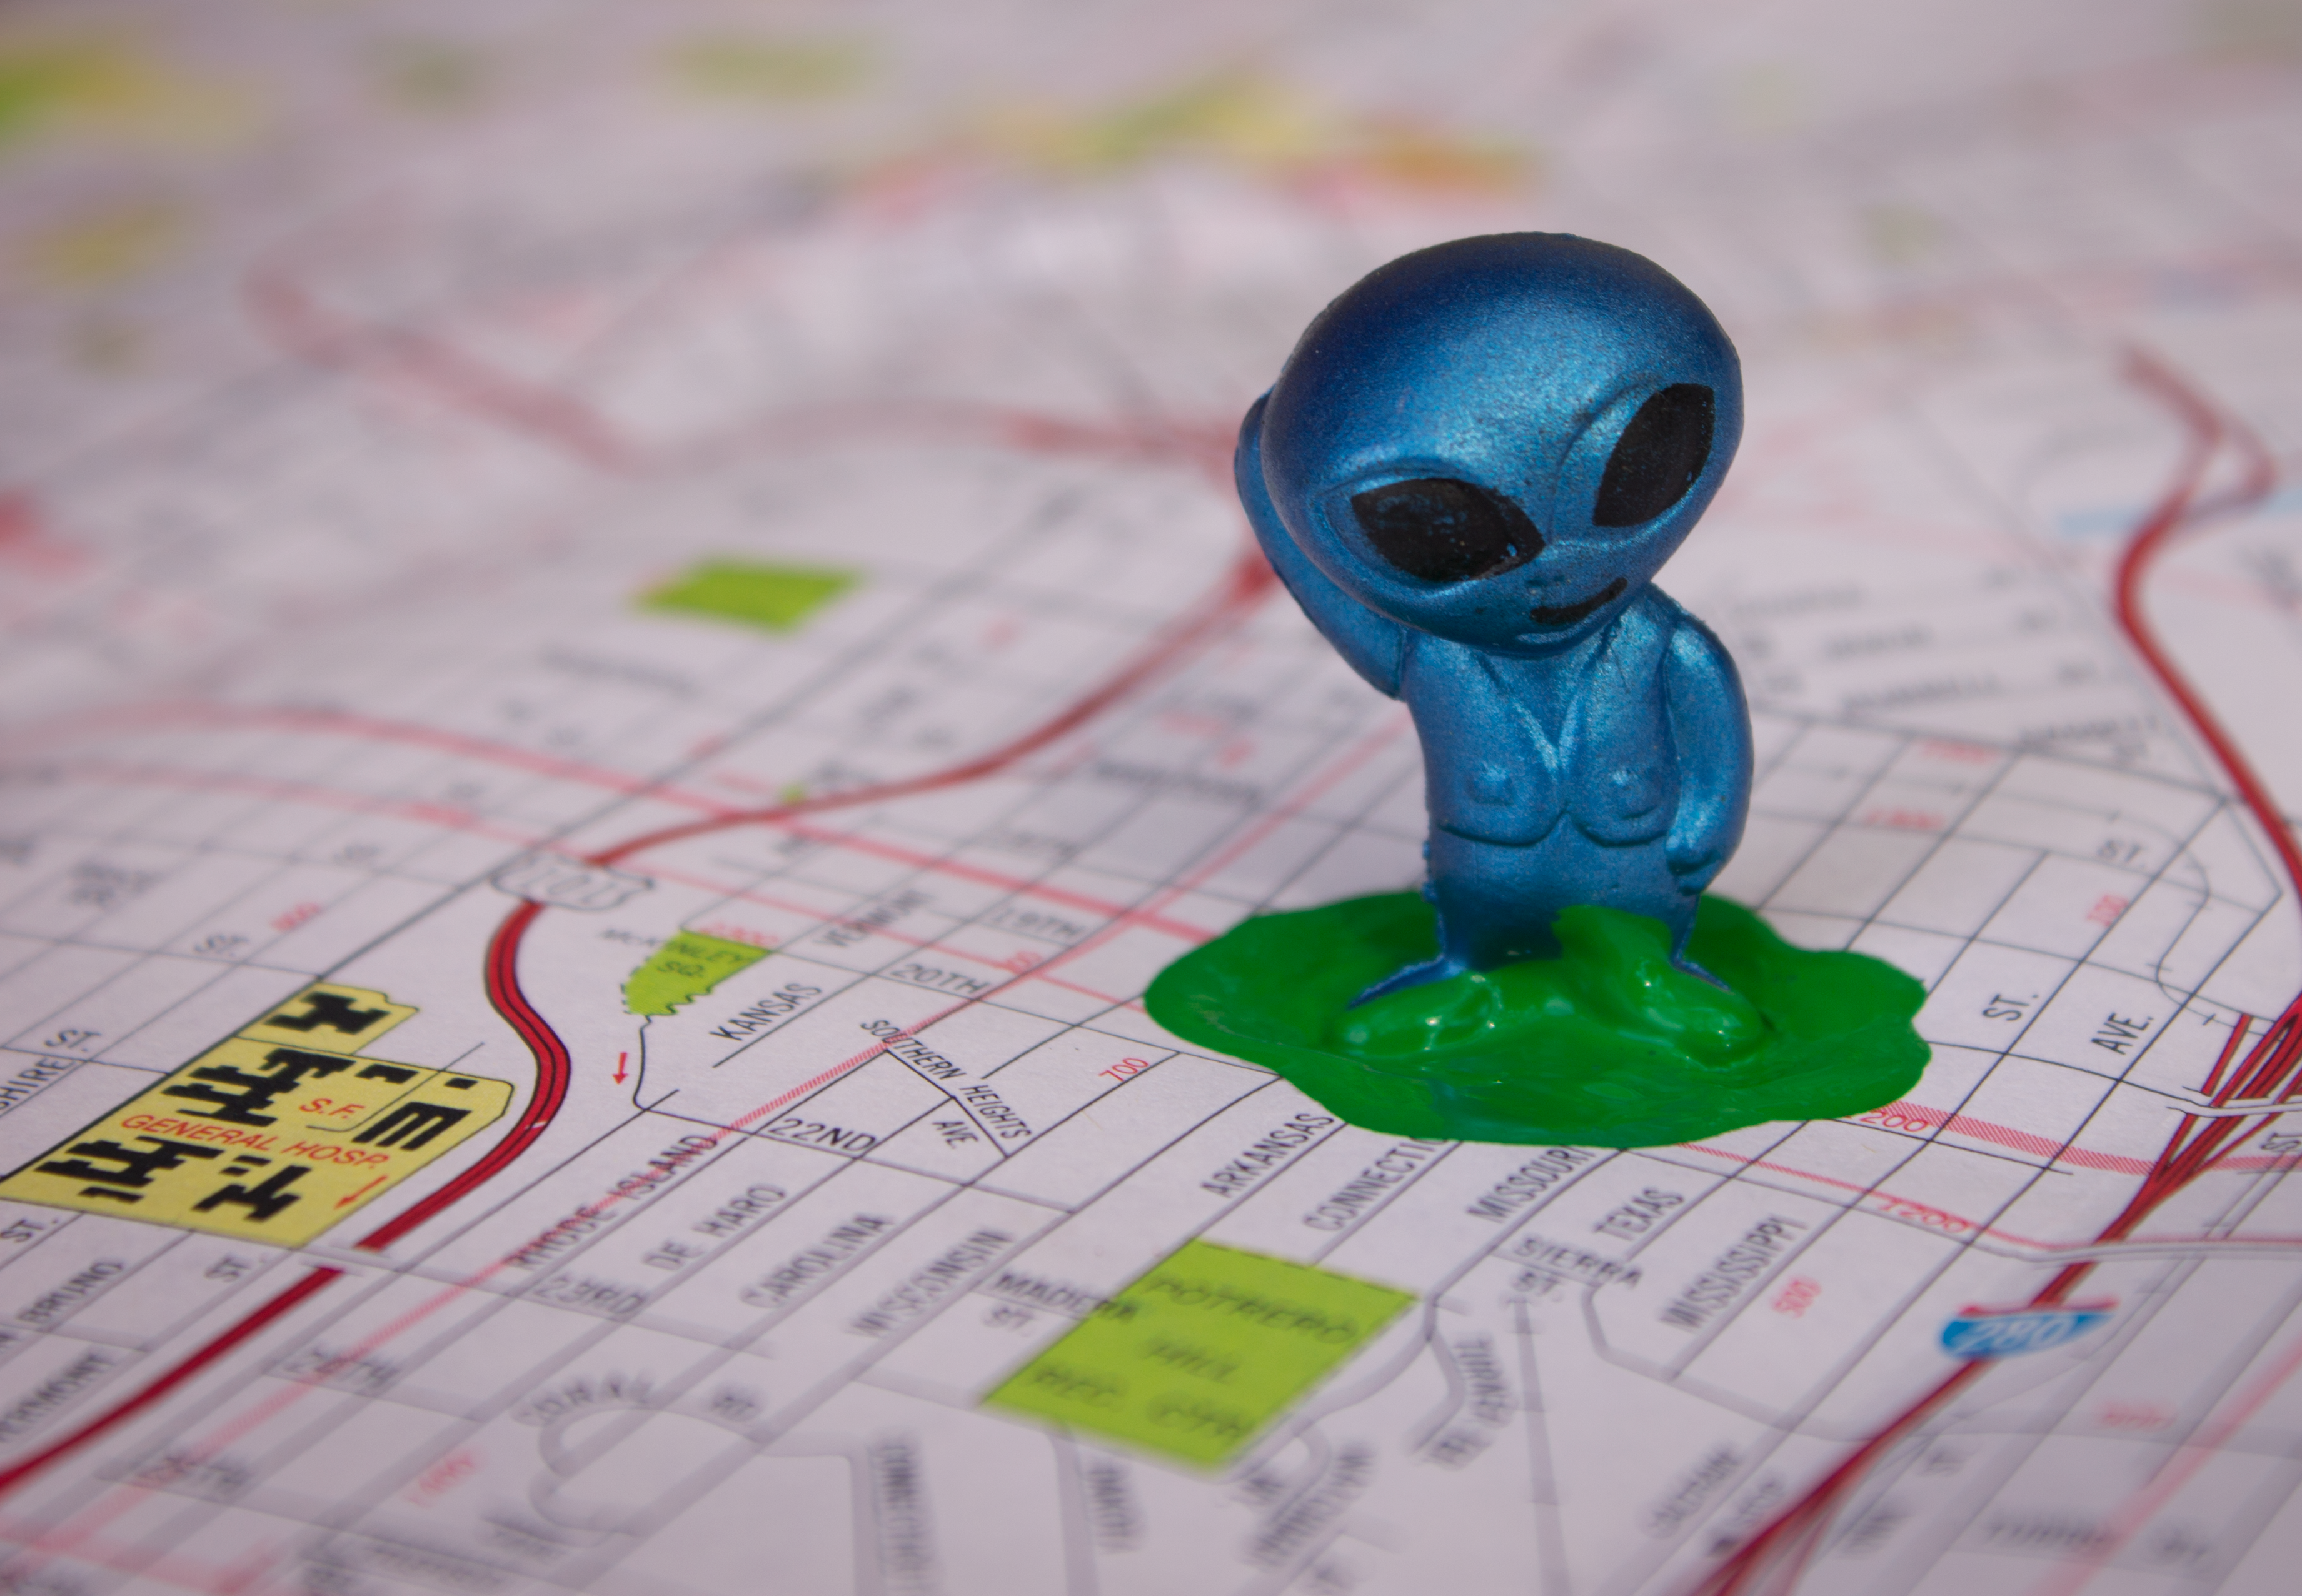 This is a photo of a toy alien standing in a puddle of green paint on a map